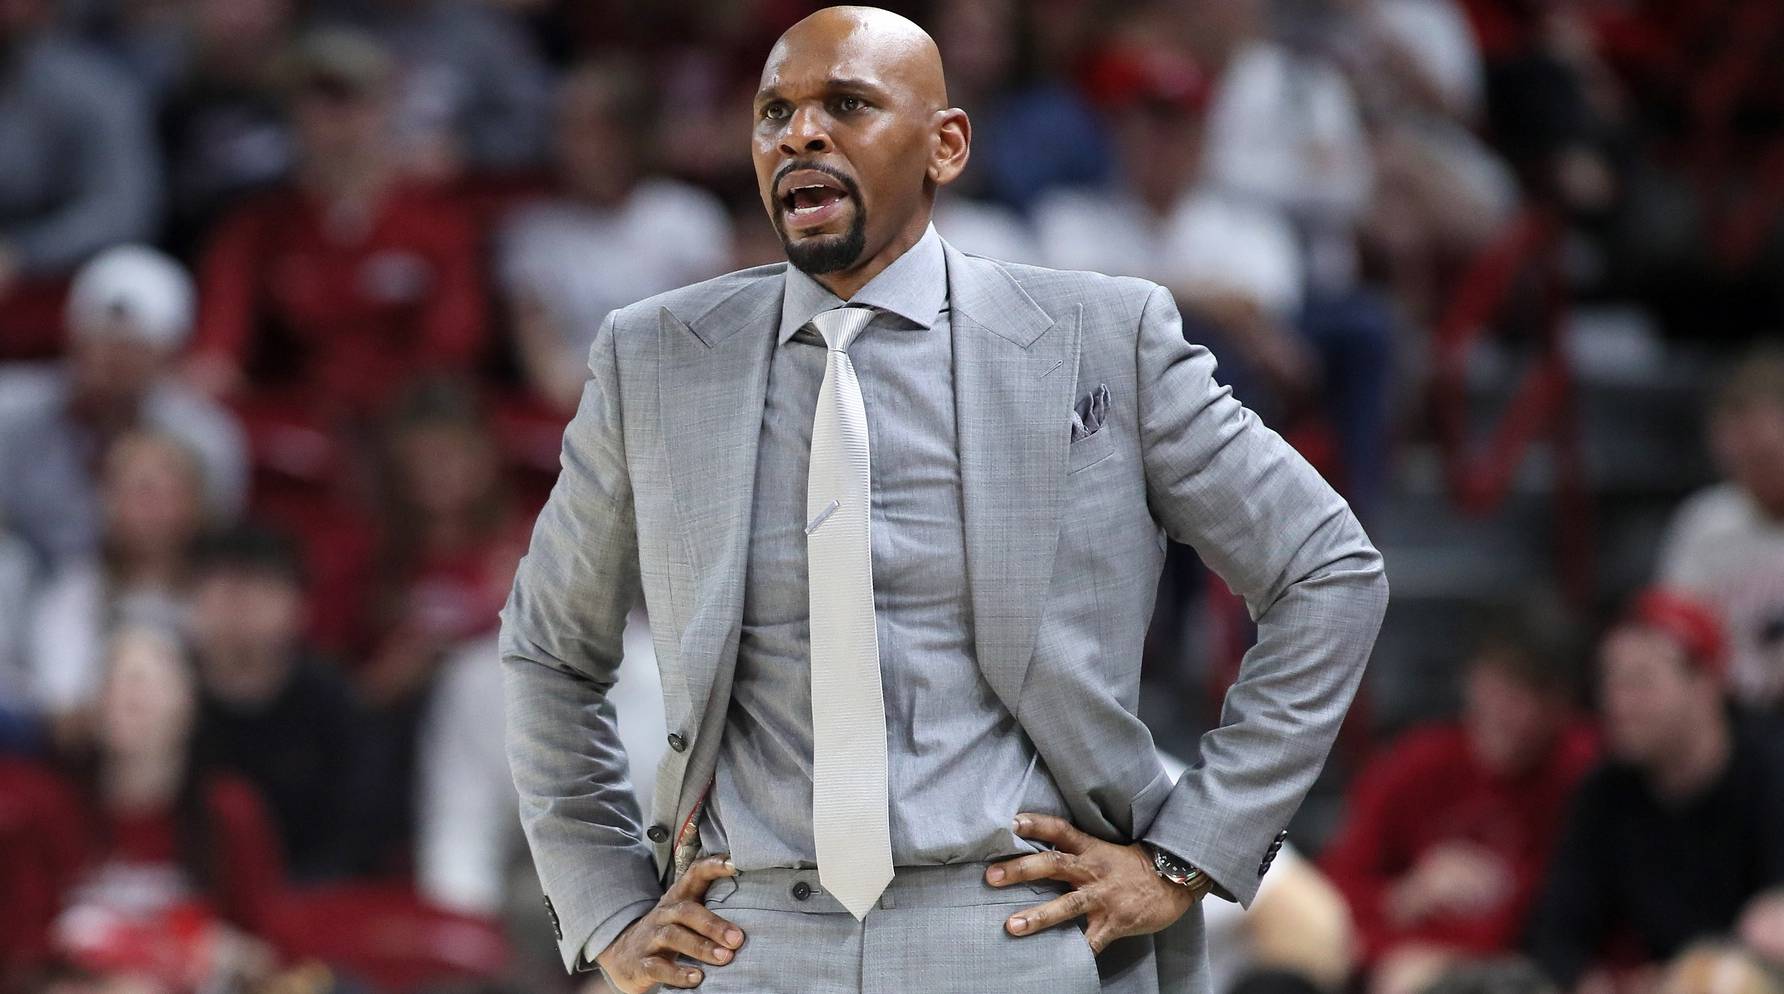 Vanderbilt head coach Jerry Stackhouse looks on while coaching in a game.